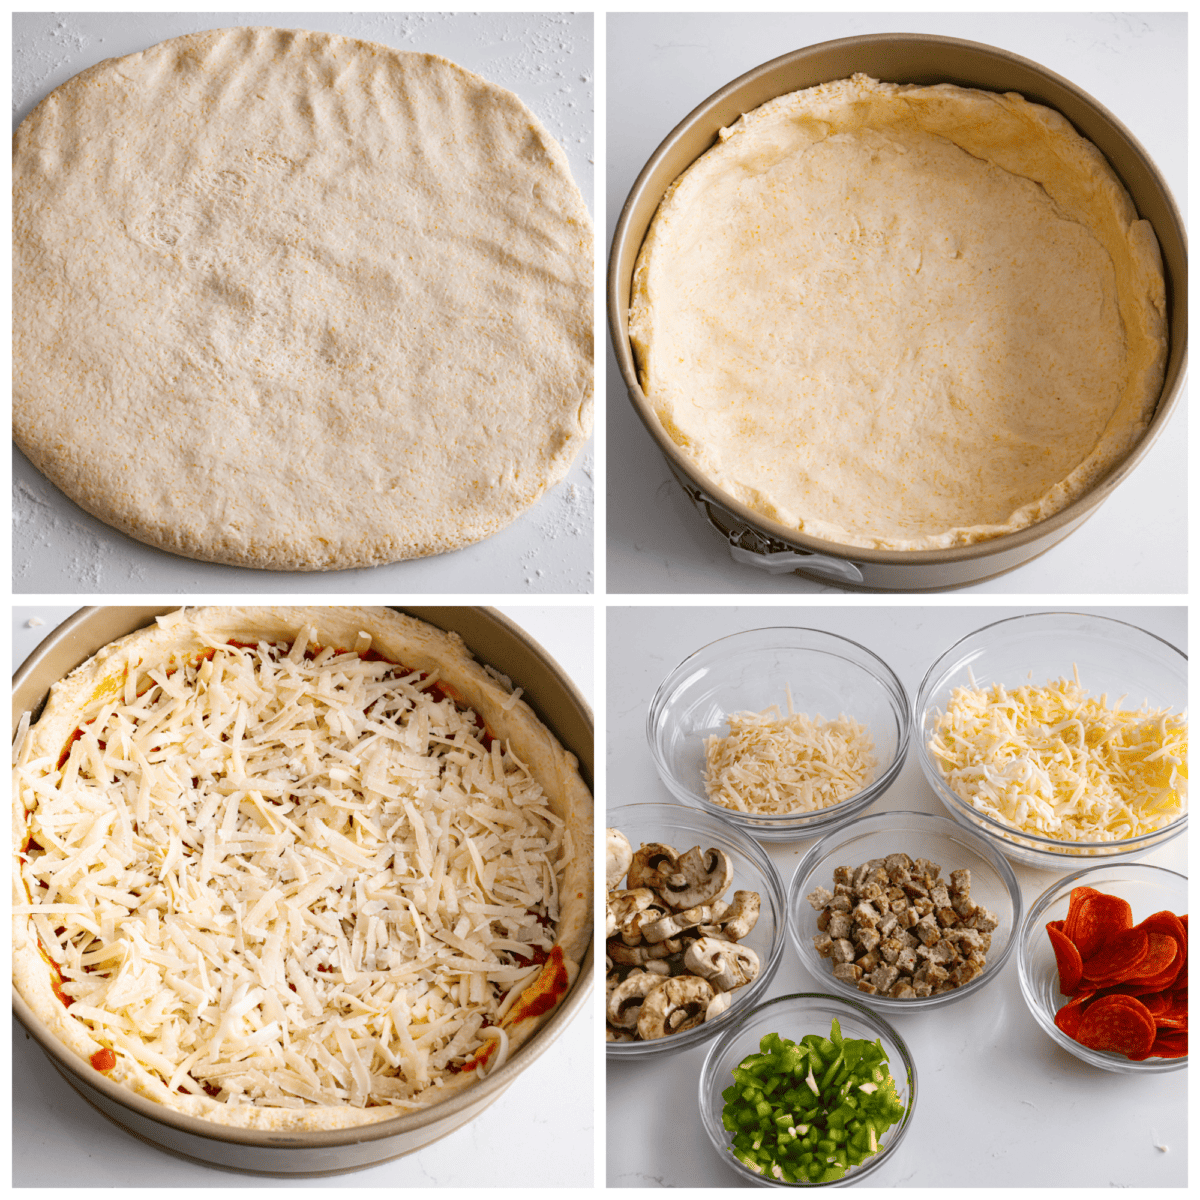 Collage of the pizza being prepared step-by-step.